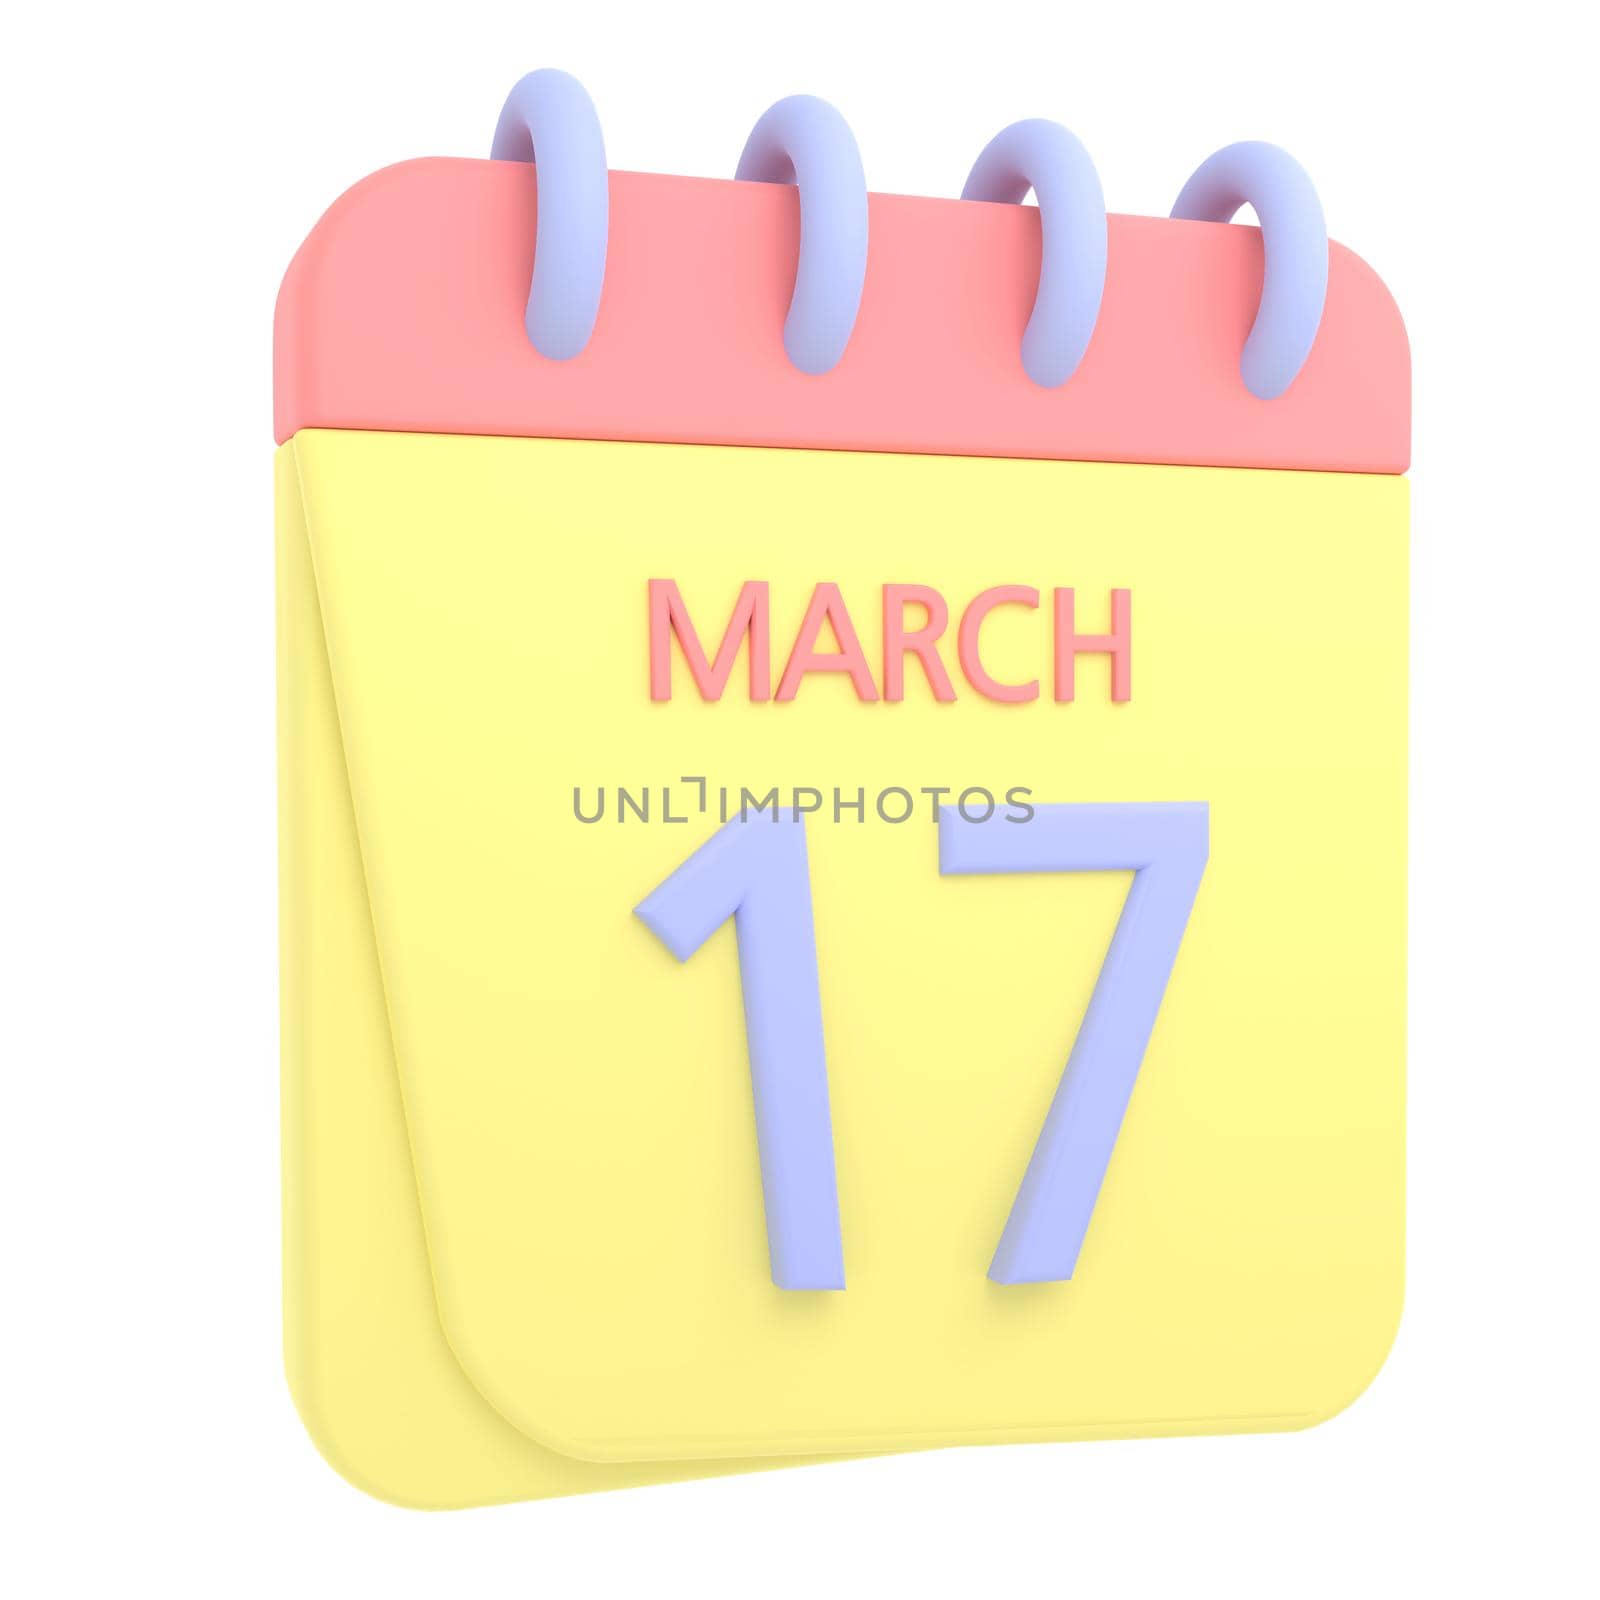 17th March 3D calendar icon. Web style. High resolution image. White background